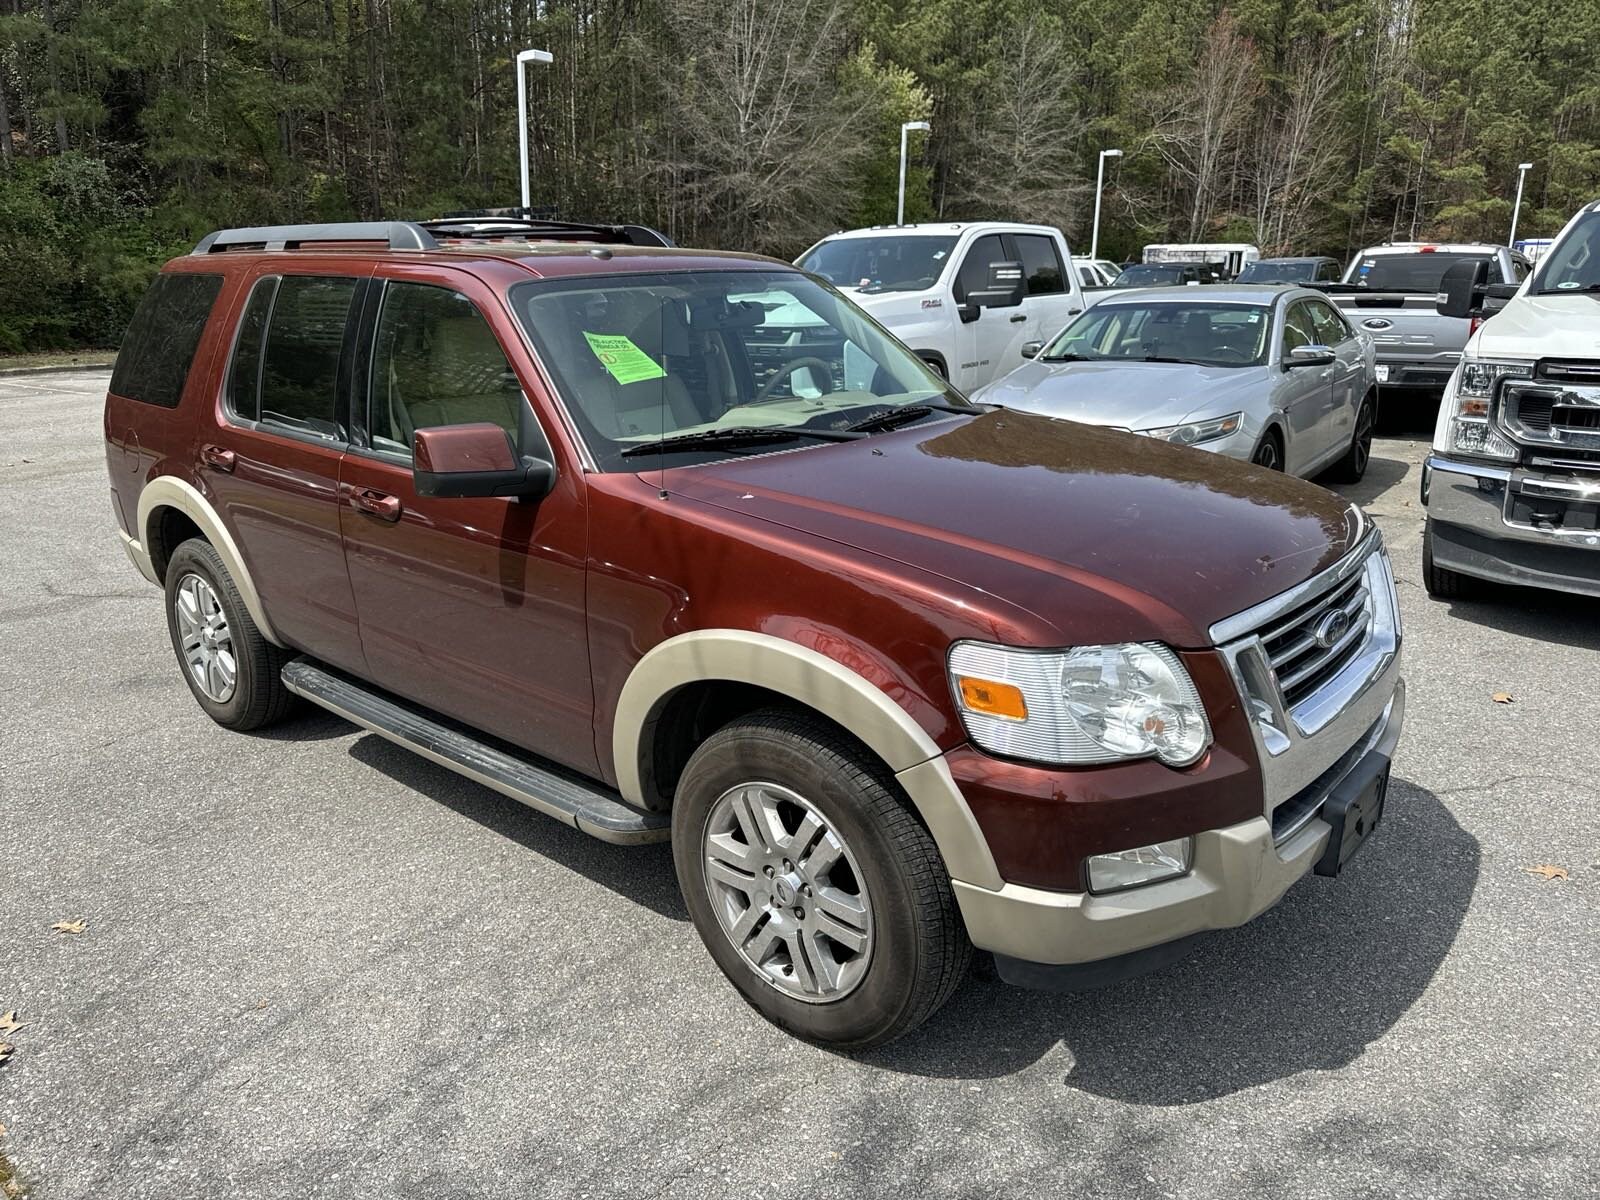 Used 2010 Ford Explorer Eddie Bauer with VIN 1FMEU6EE7AUA38350 for sale in Hoover, AL